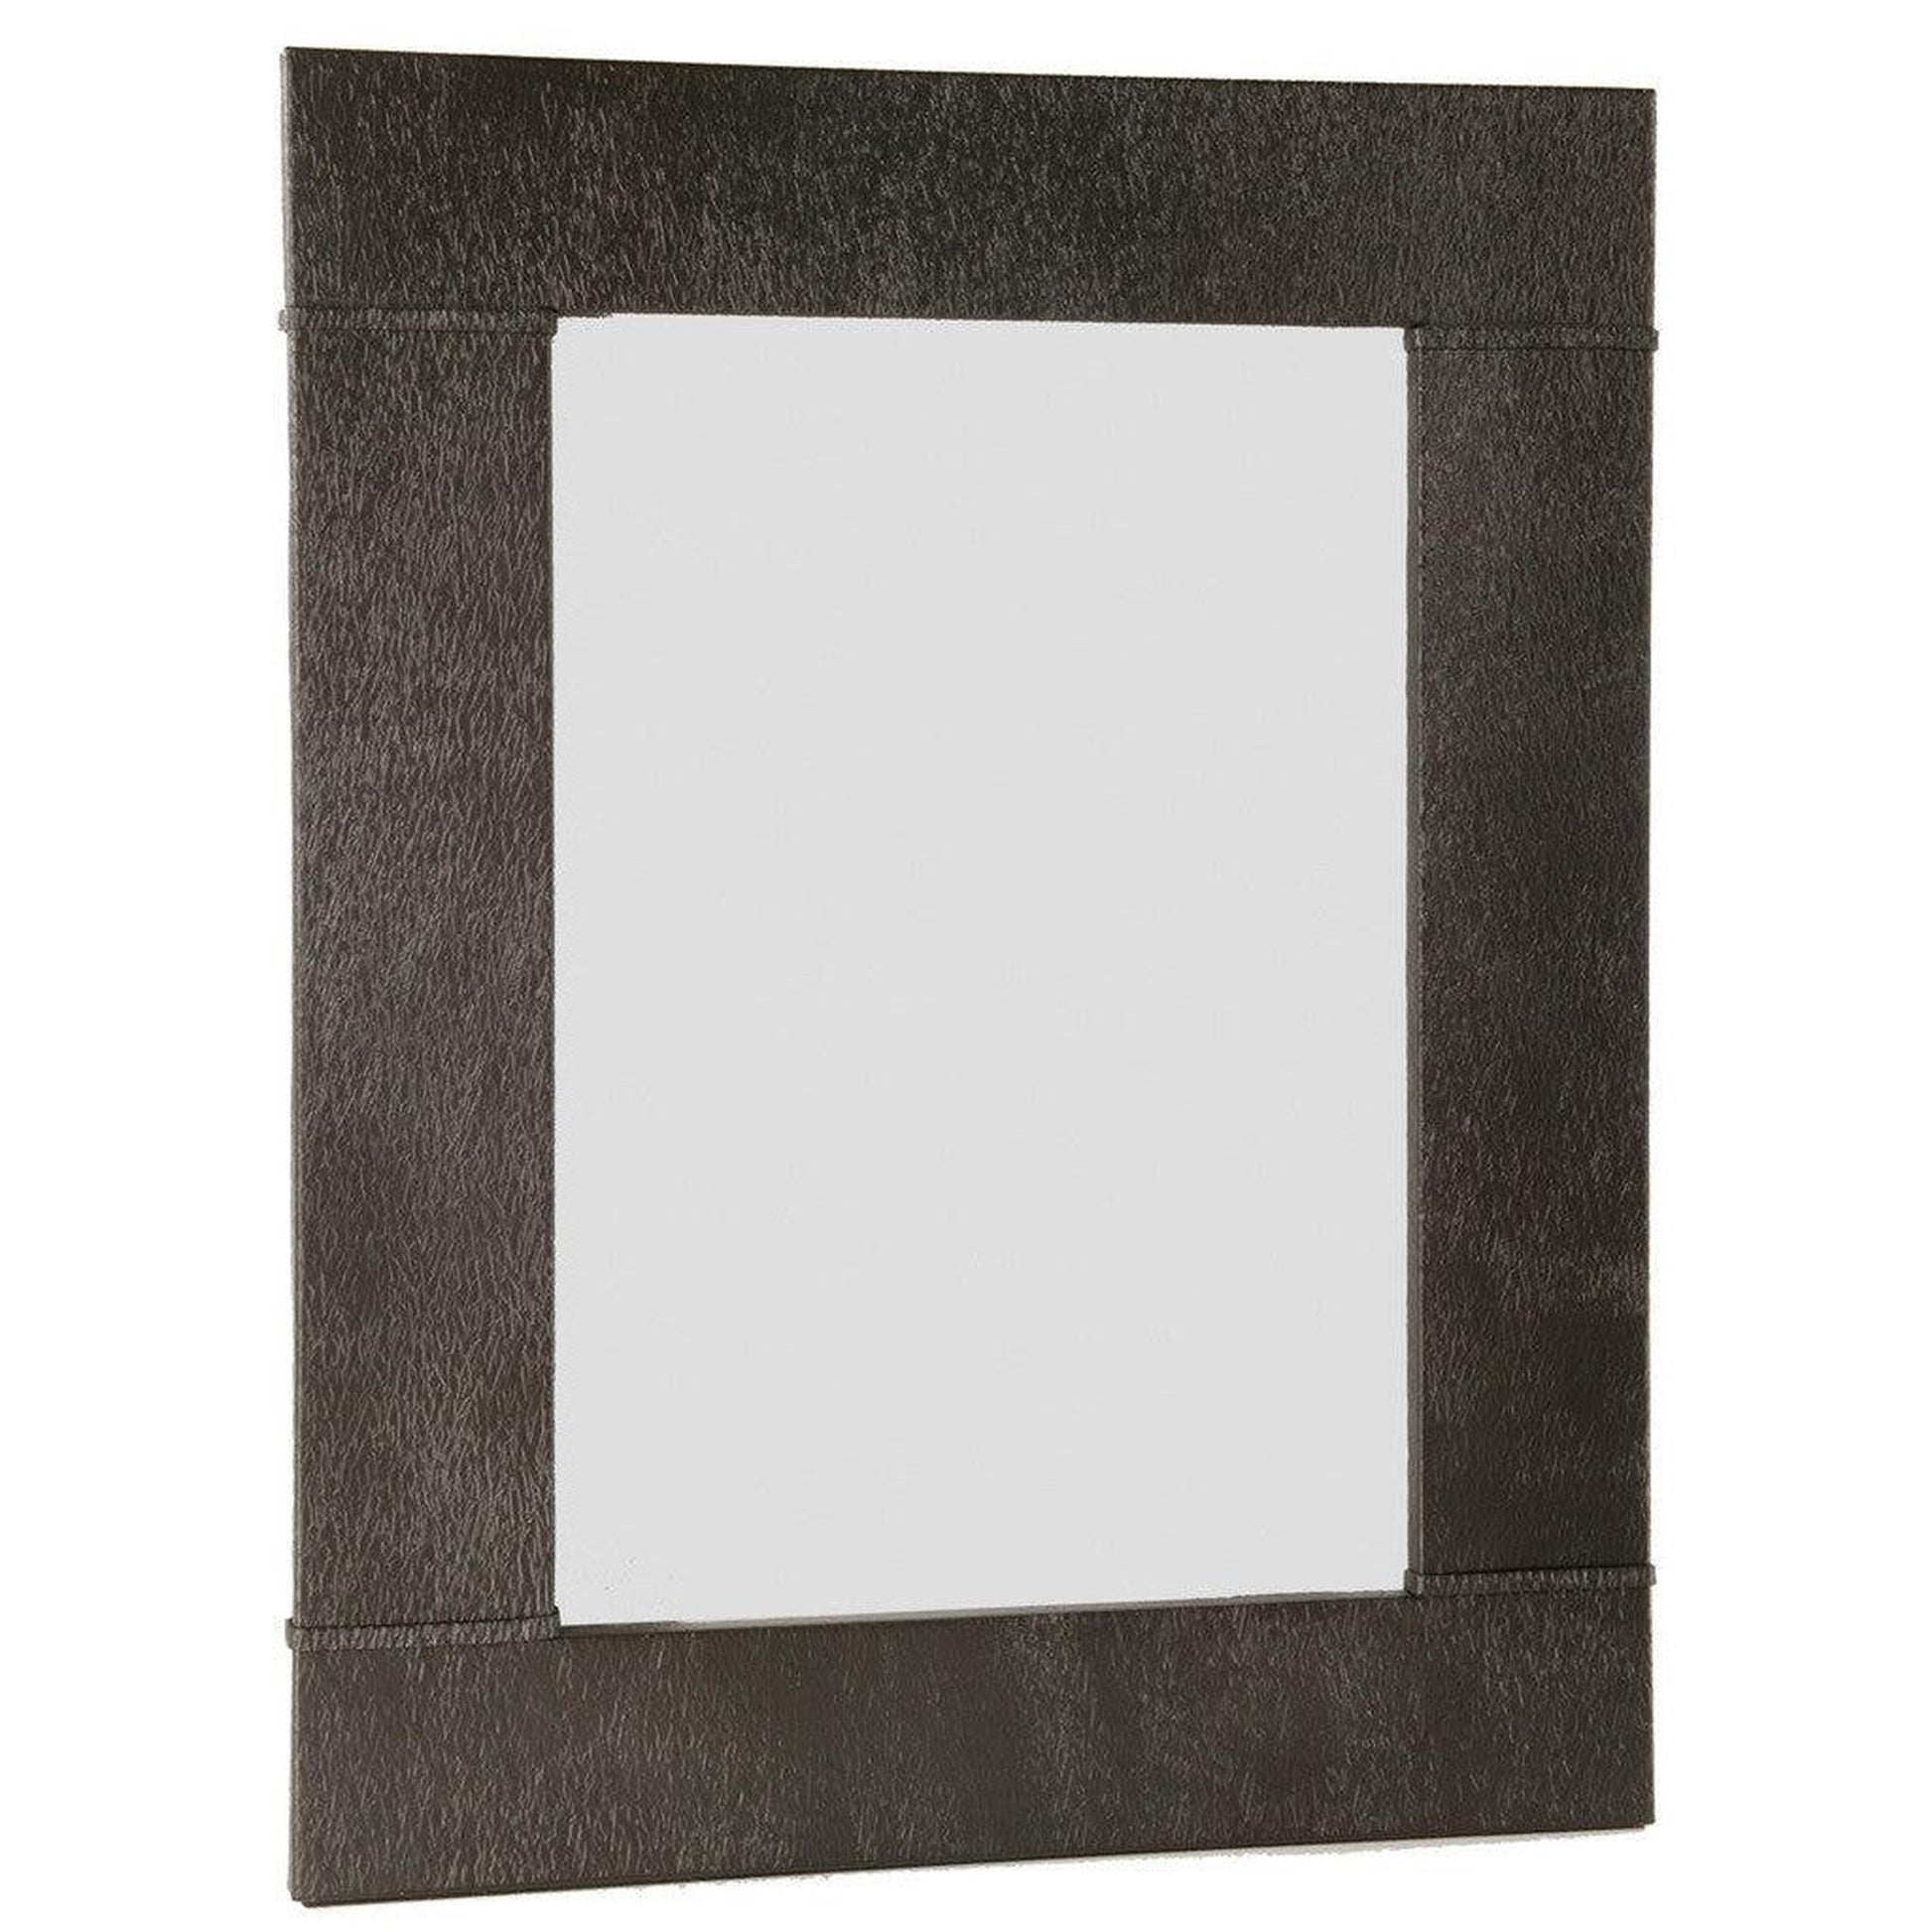 Stone County Ironworks Cedarvale 37" x 45" Large Hand Rubbed Pewter Iron Wall Mirror With Pewter Iron Accent